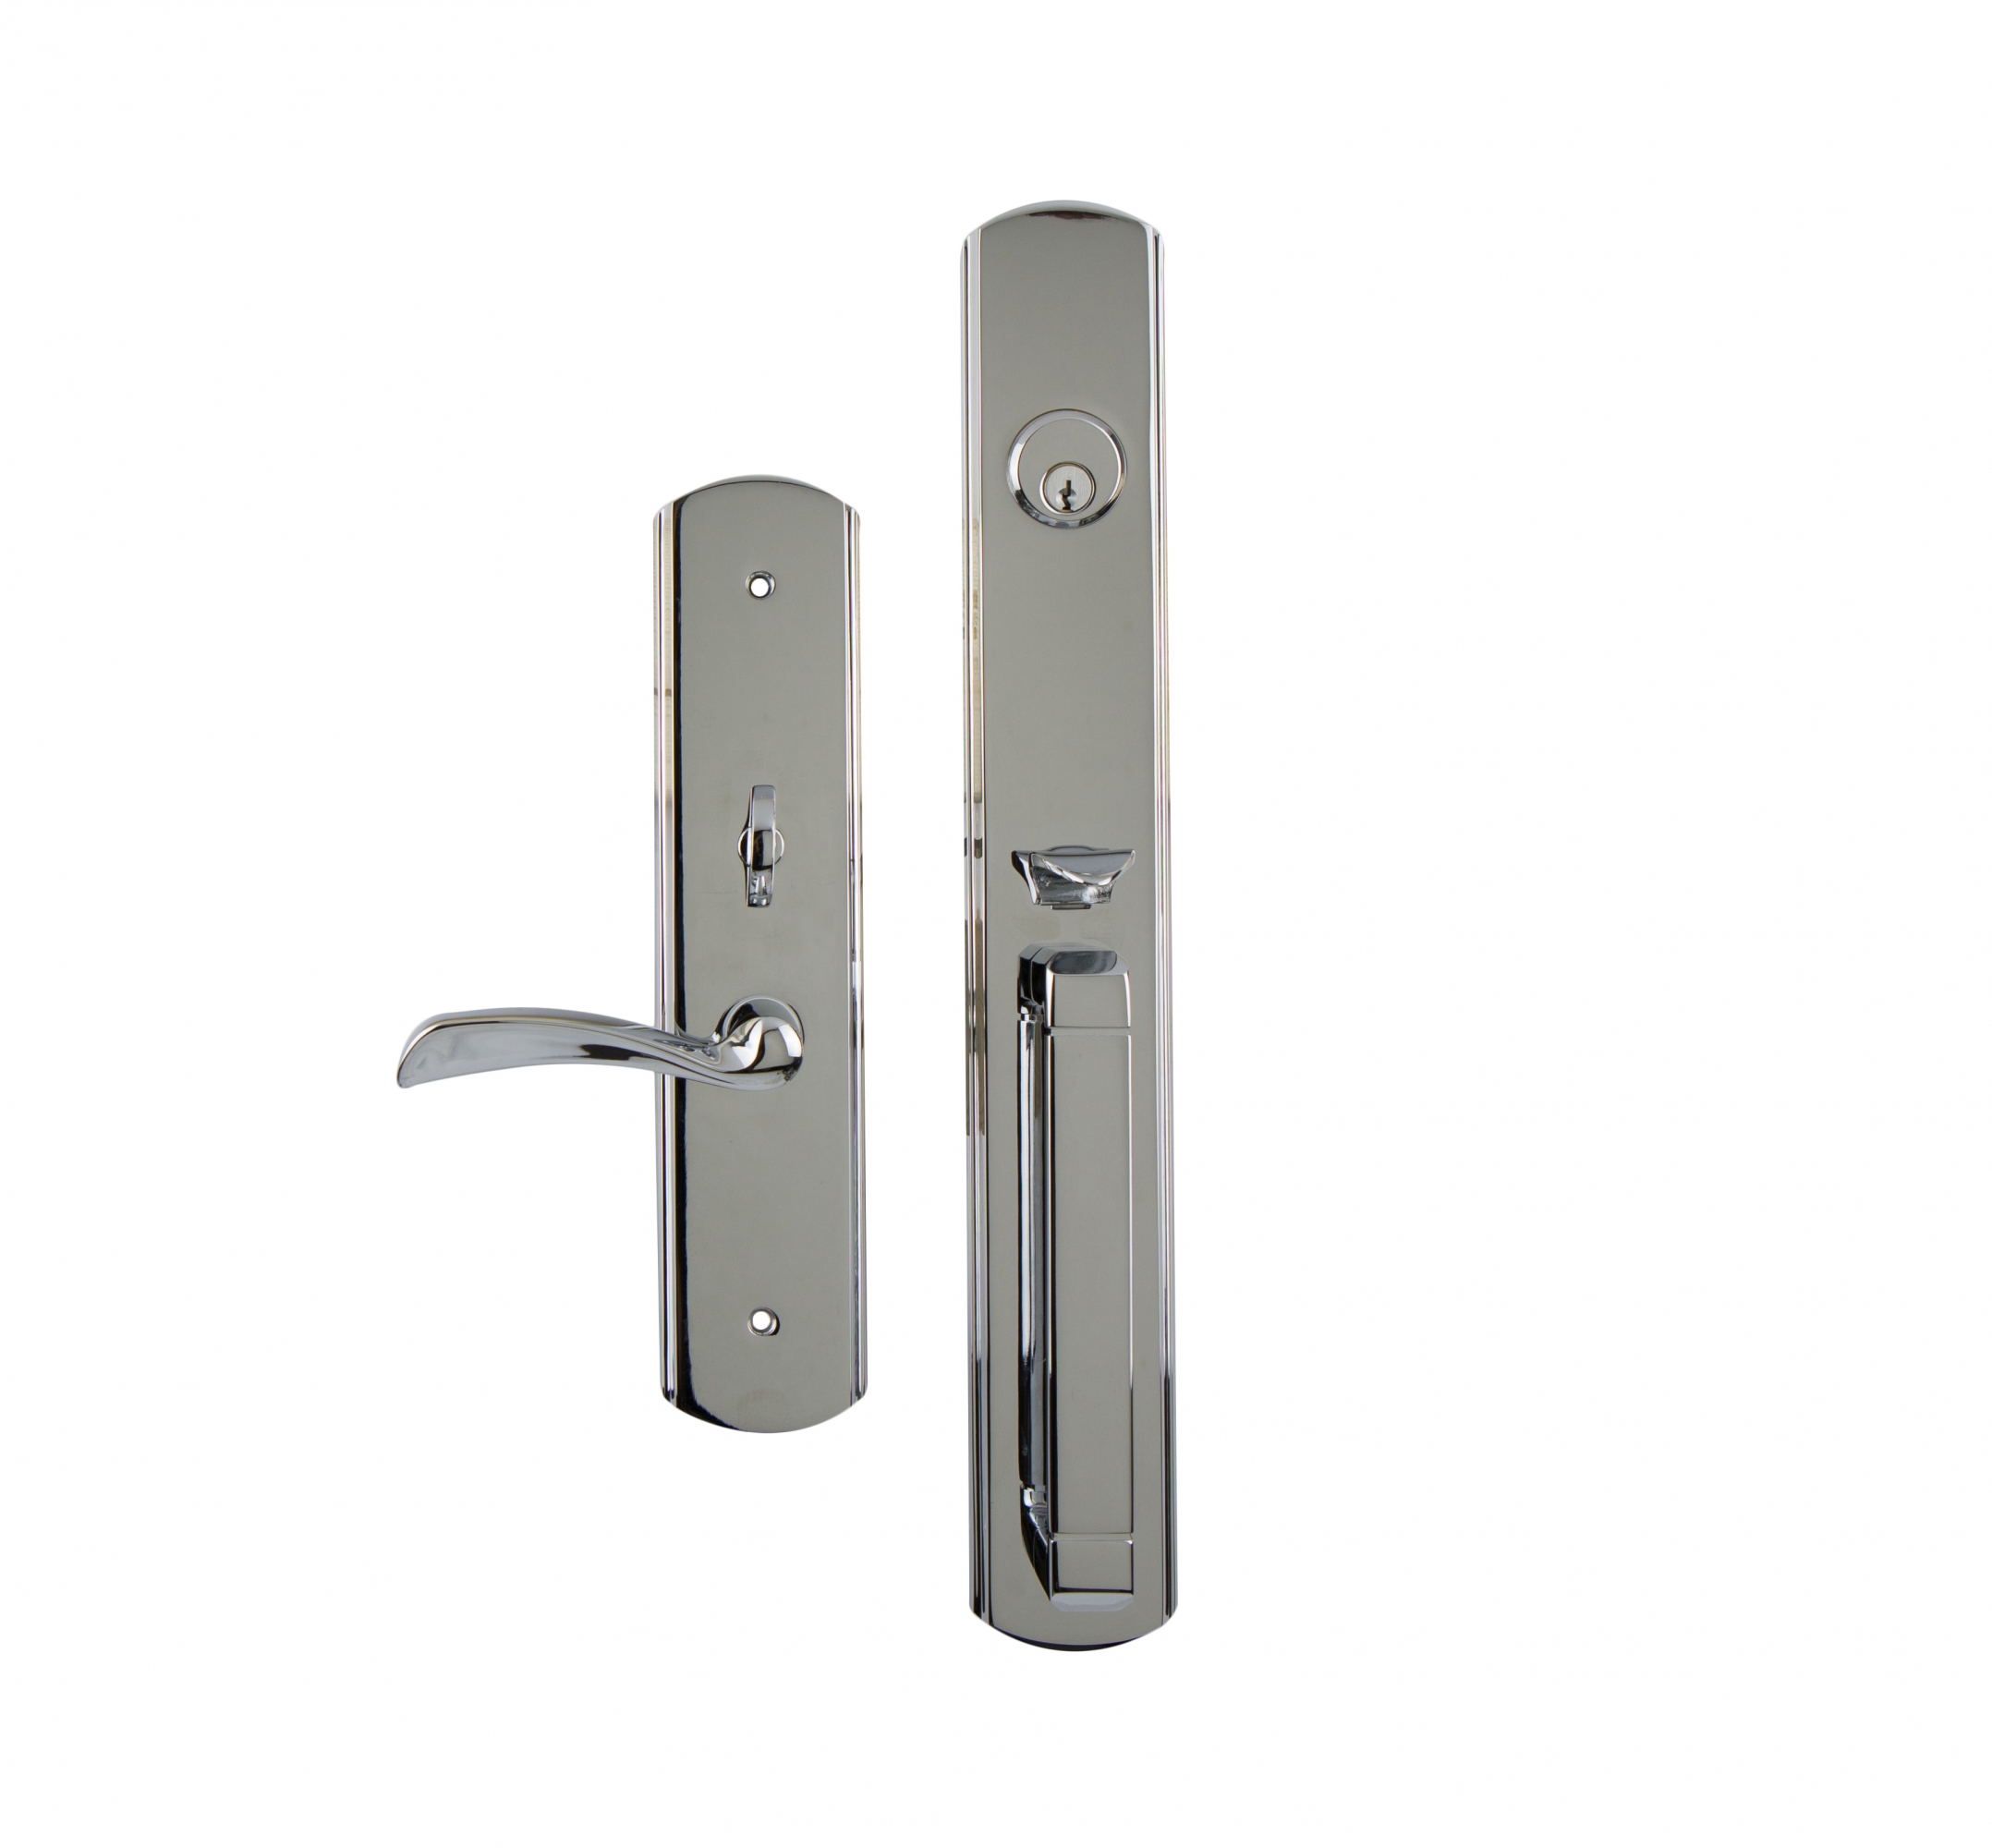 The Metro – Mortise – Polished Chrome Door Handle